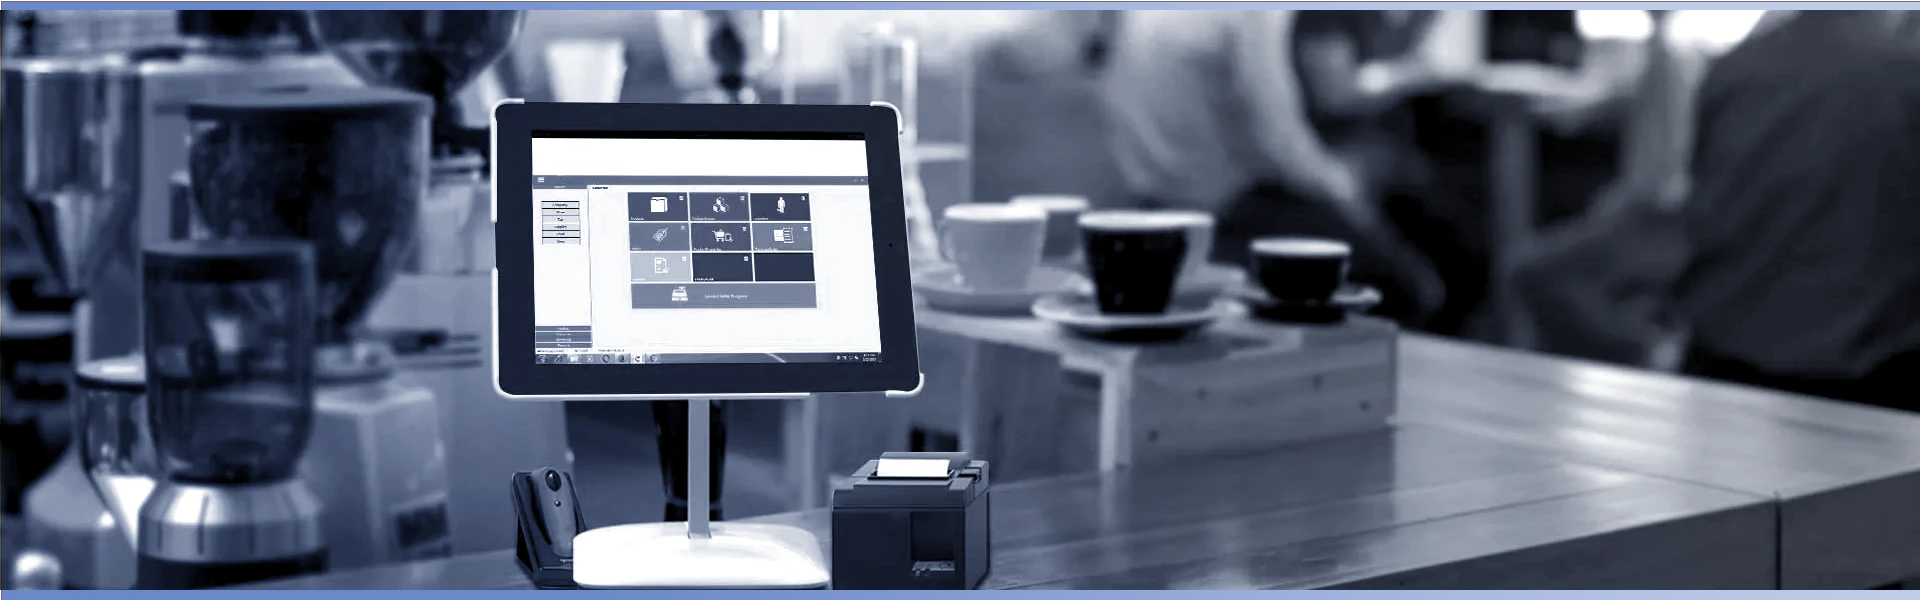 Solutions by Device - POS Systems